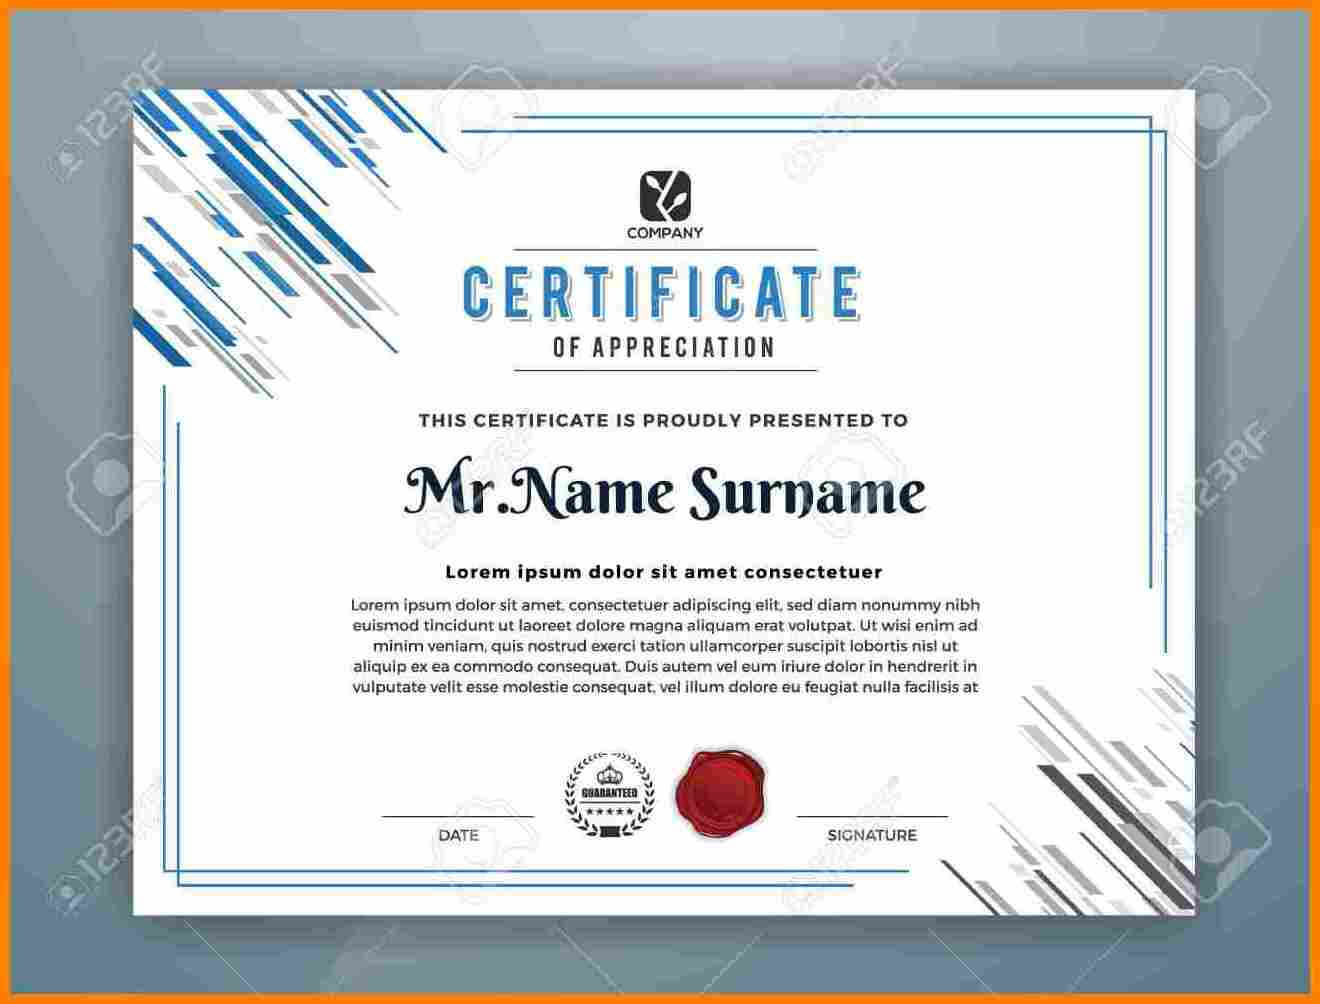 12+ Design Certificates Templates | Grittrader With Regard To Design A Certificate Template